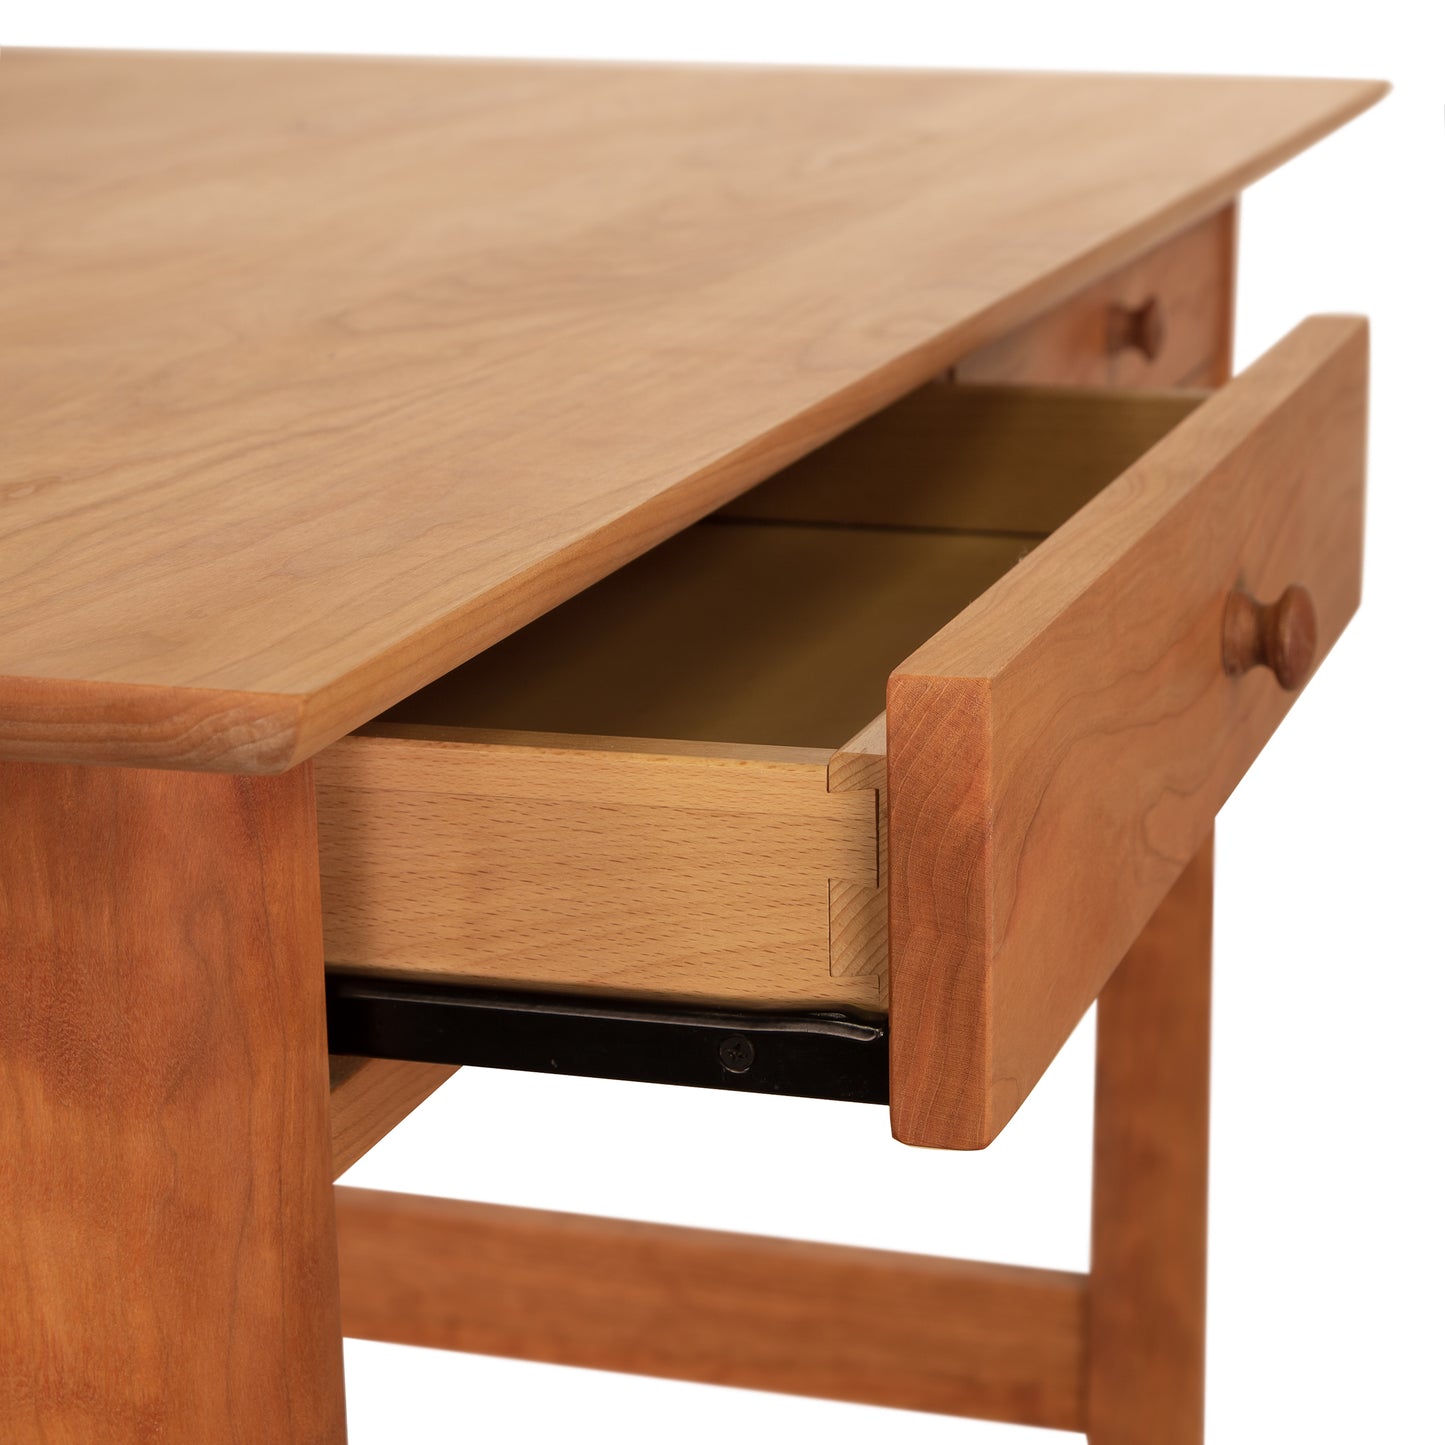 A modern Heartwood Shaker writing desk by Vermont Furniture Designs with an open drawer revealing its interior and construction details on a white background.